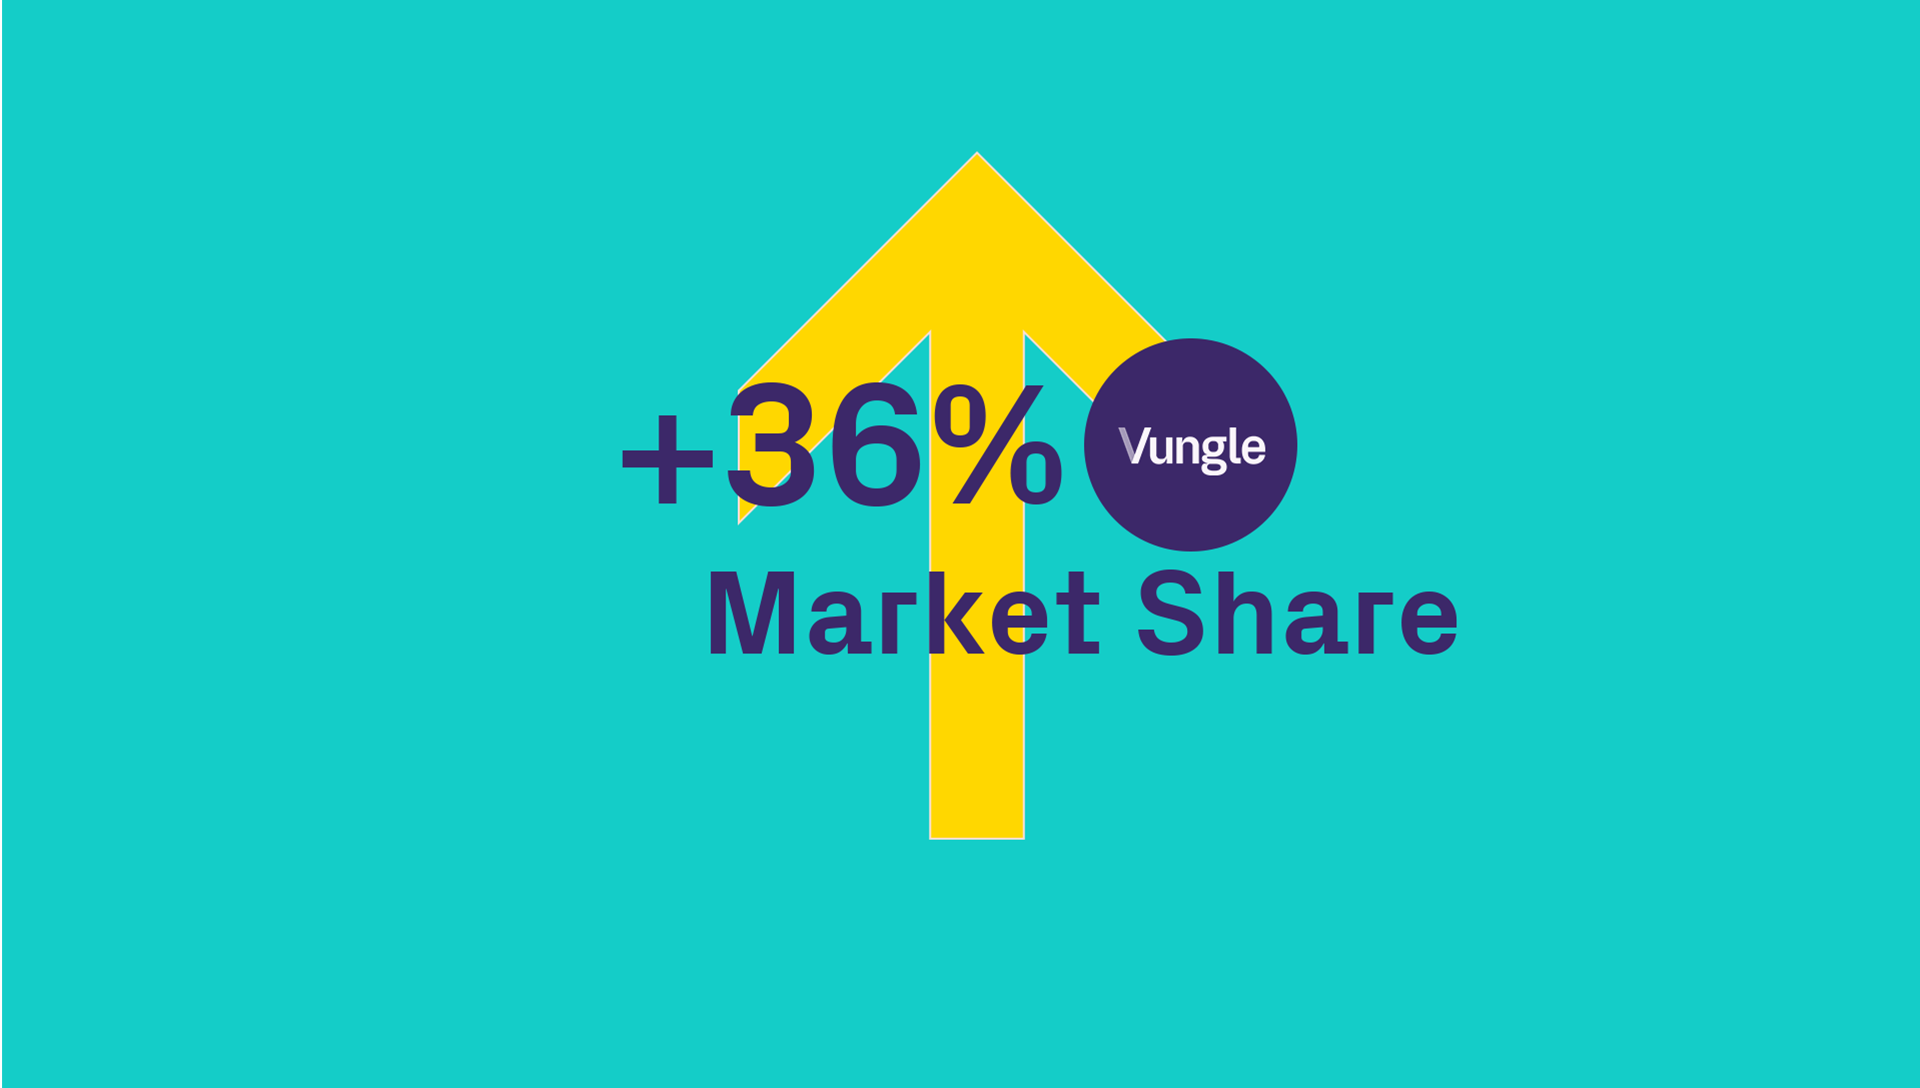 Vungle, Top 5 Media Partner, Boosts Its Market Share by 36%